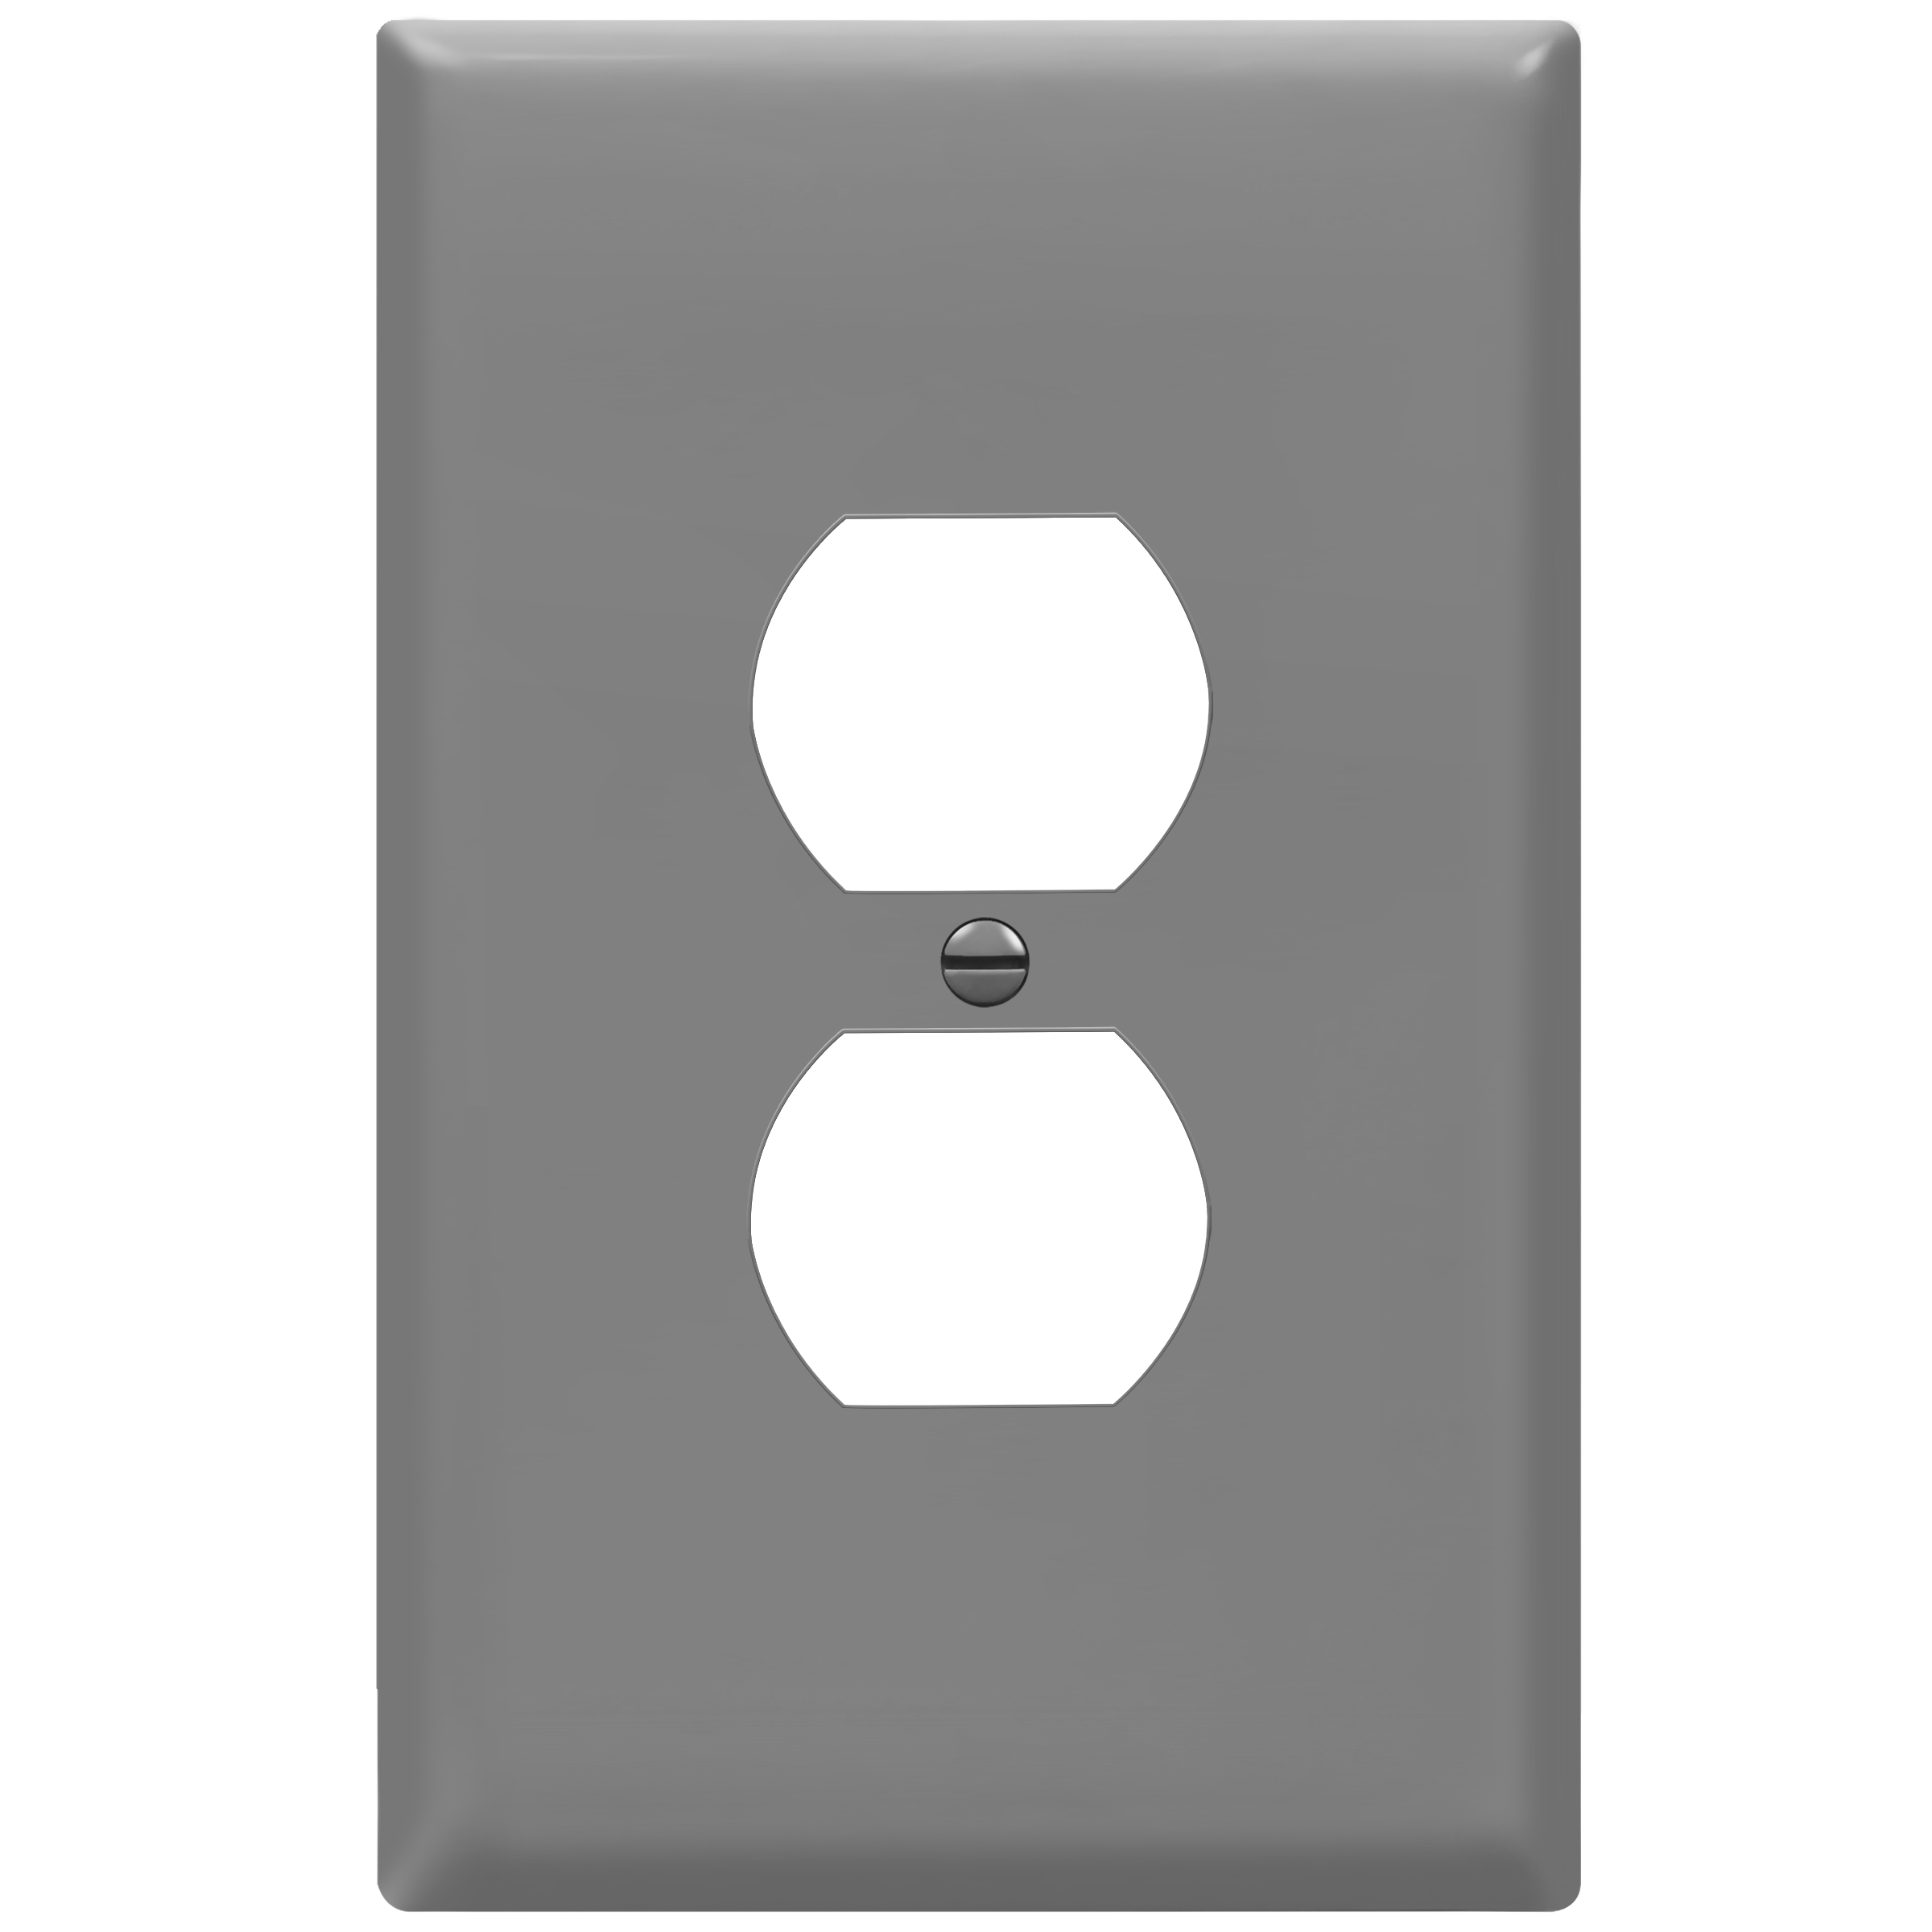 ENERLITES Duplex Receptacle Outlet Wall Plate, Jumbo Electrical Outlet Cover, Gloss Finish, Oversized 1-Gang, Polycarbonate Thermoplastic, 8821O-GY, Gray - image 1 of 5